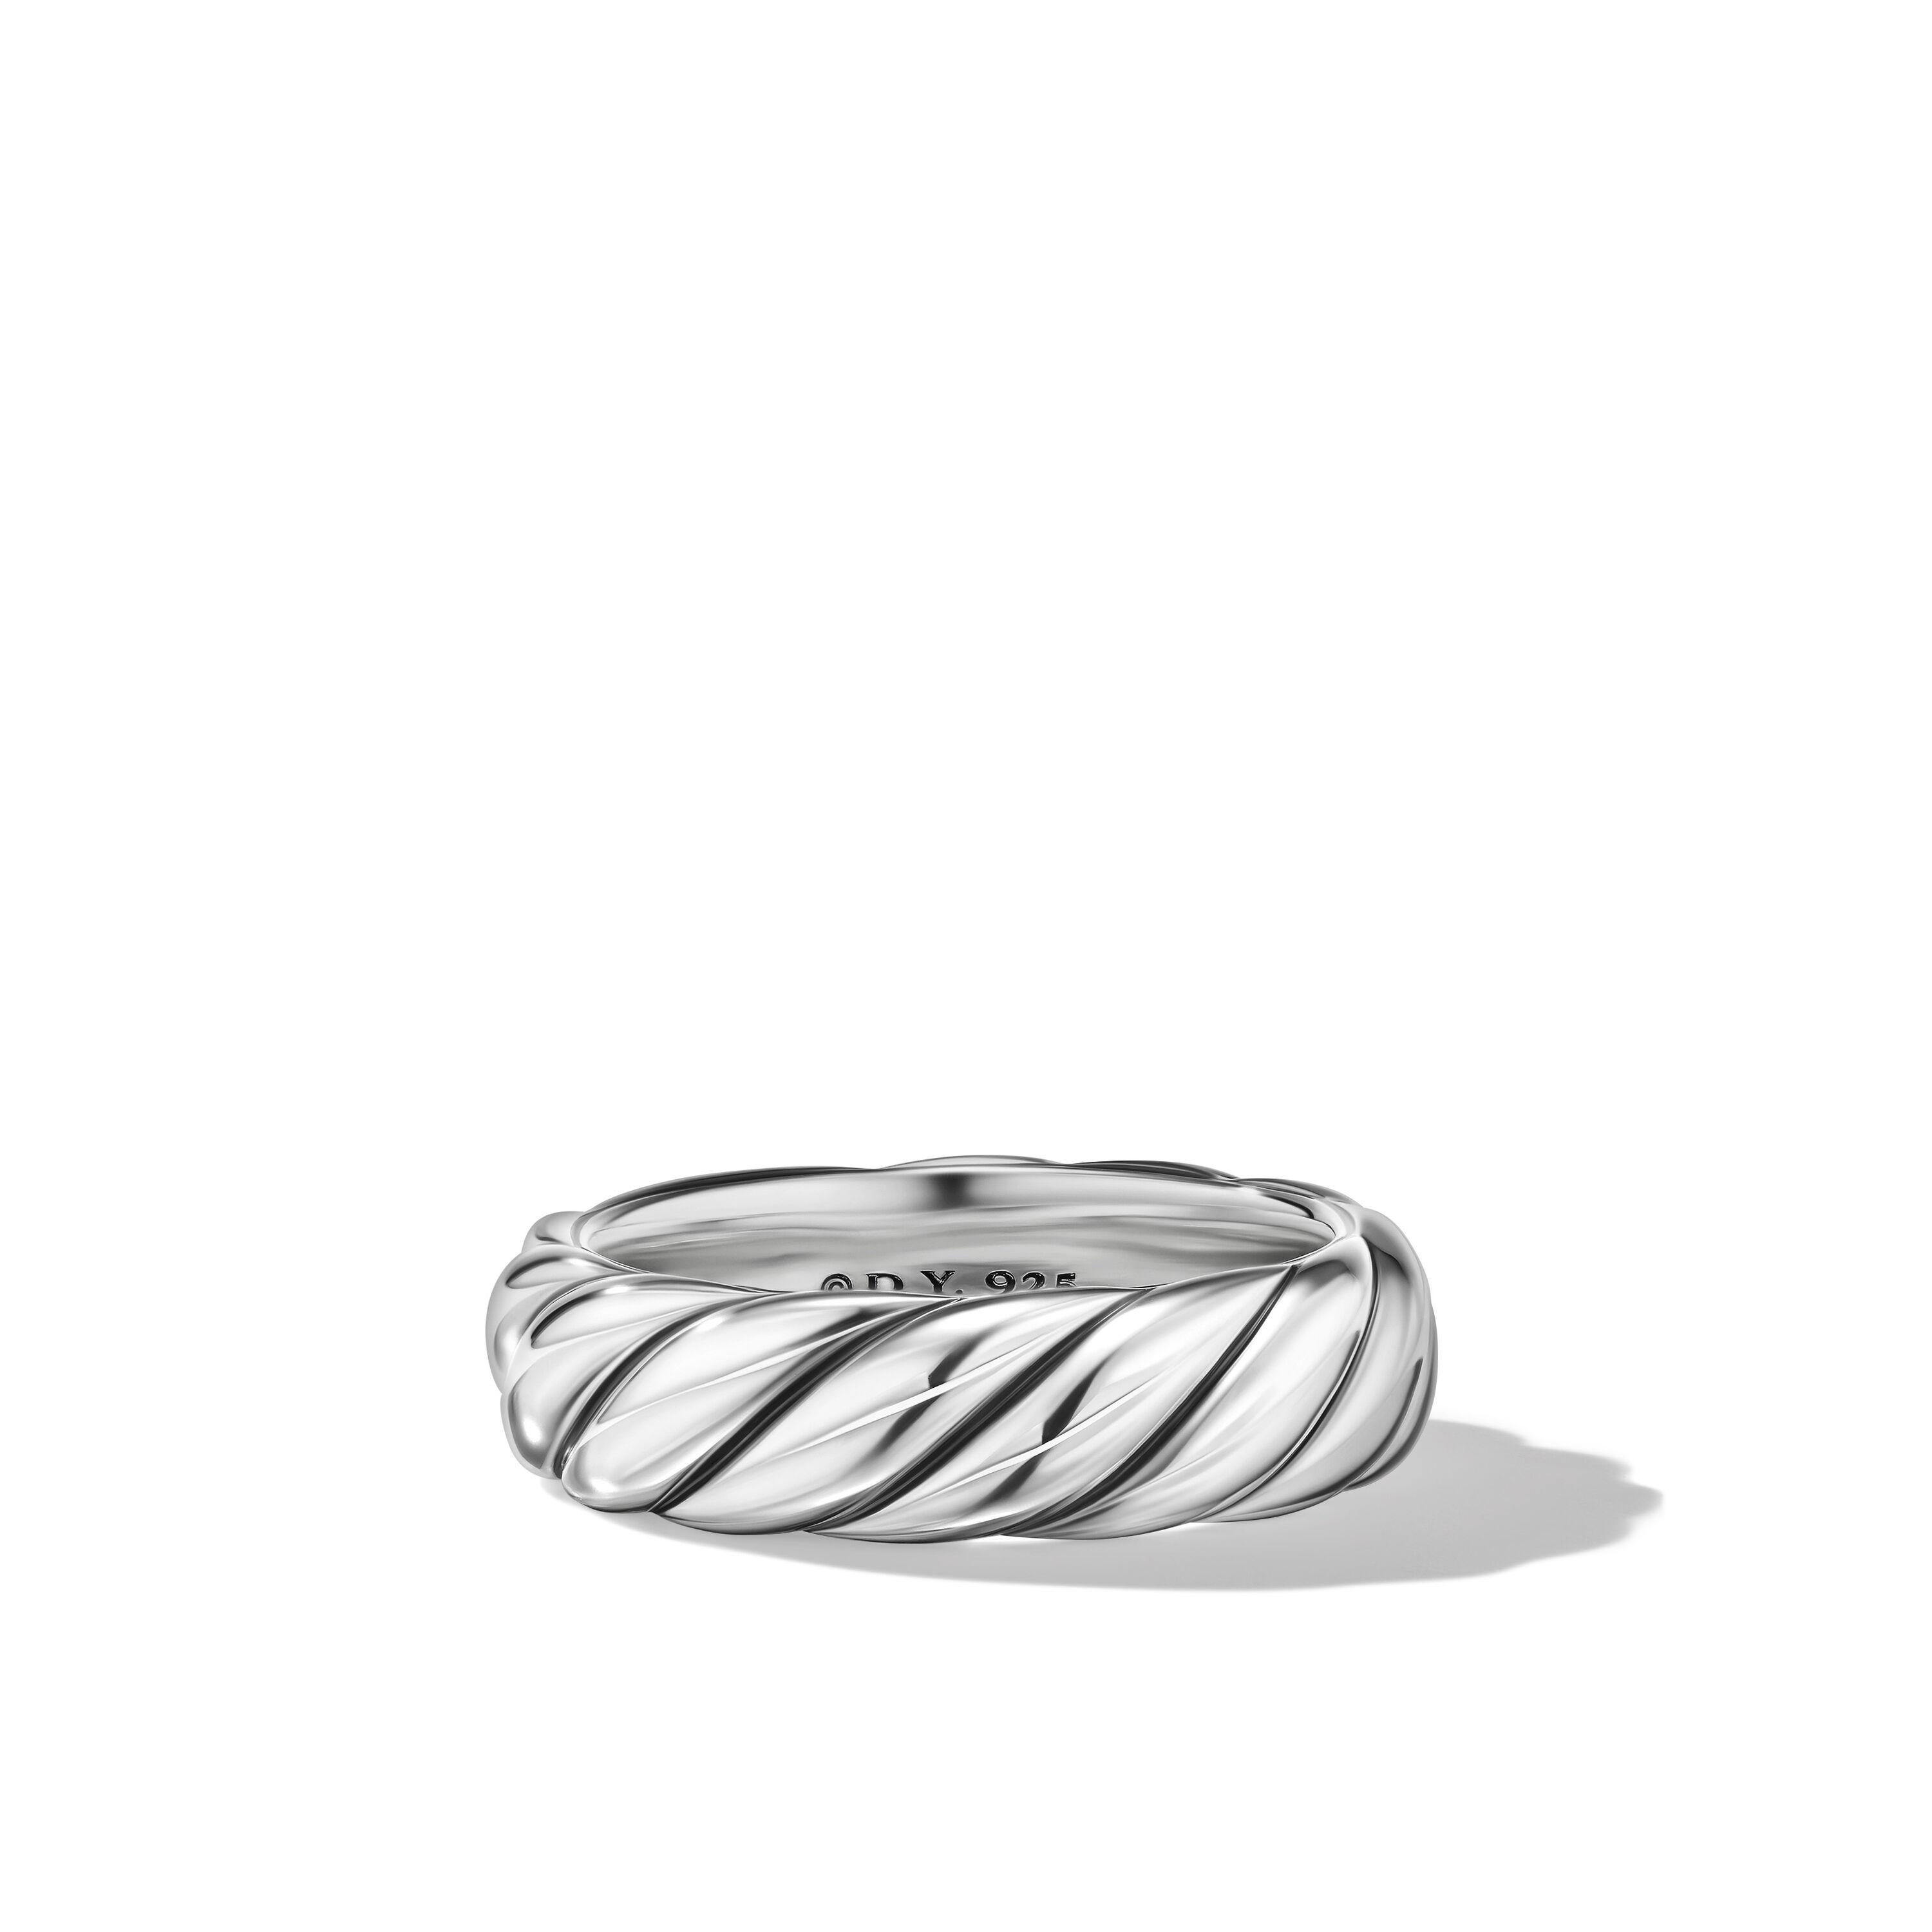 David Yurman Sculpted Cable 6mm Band in Sterling Silver, size 6 0